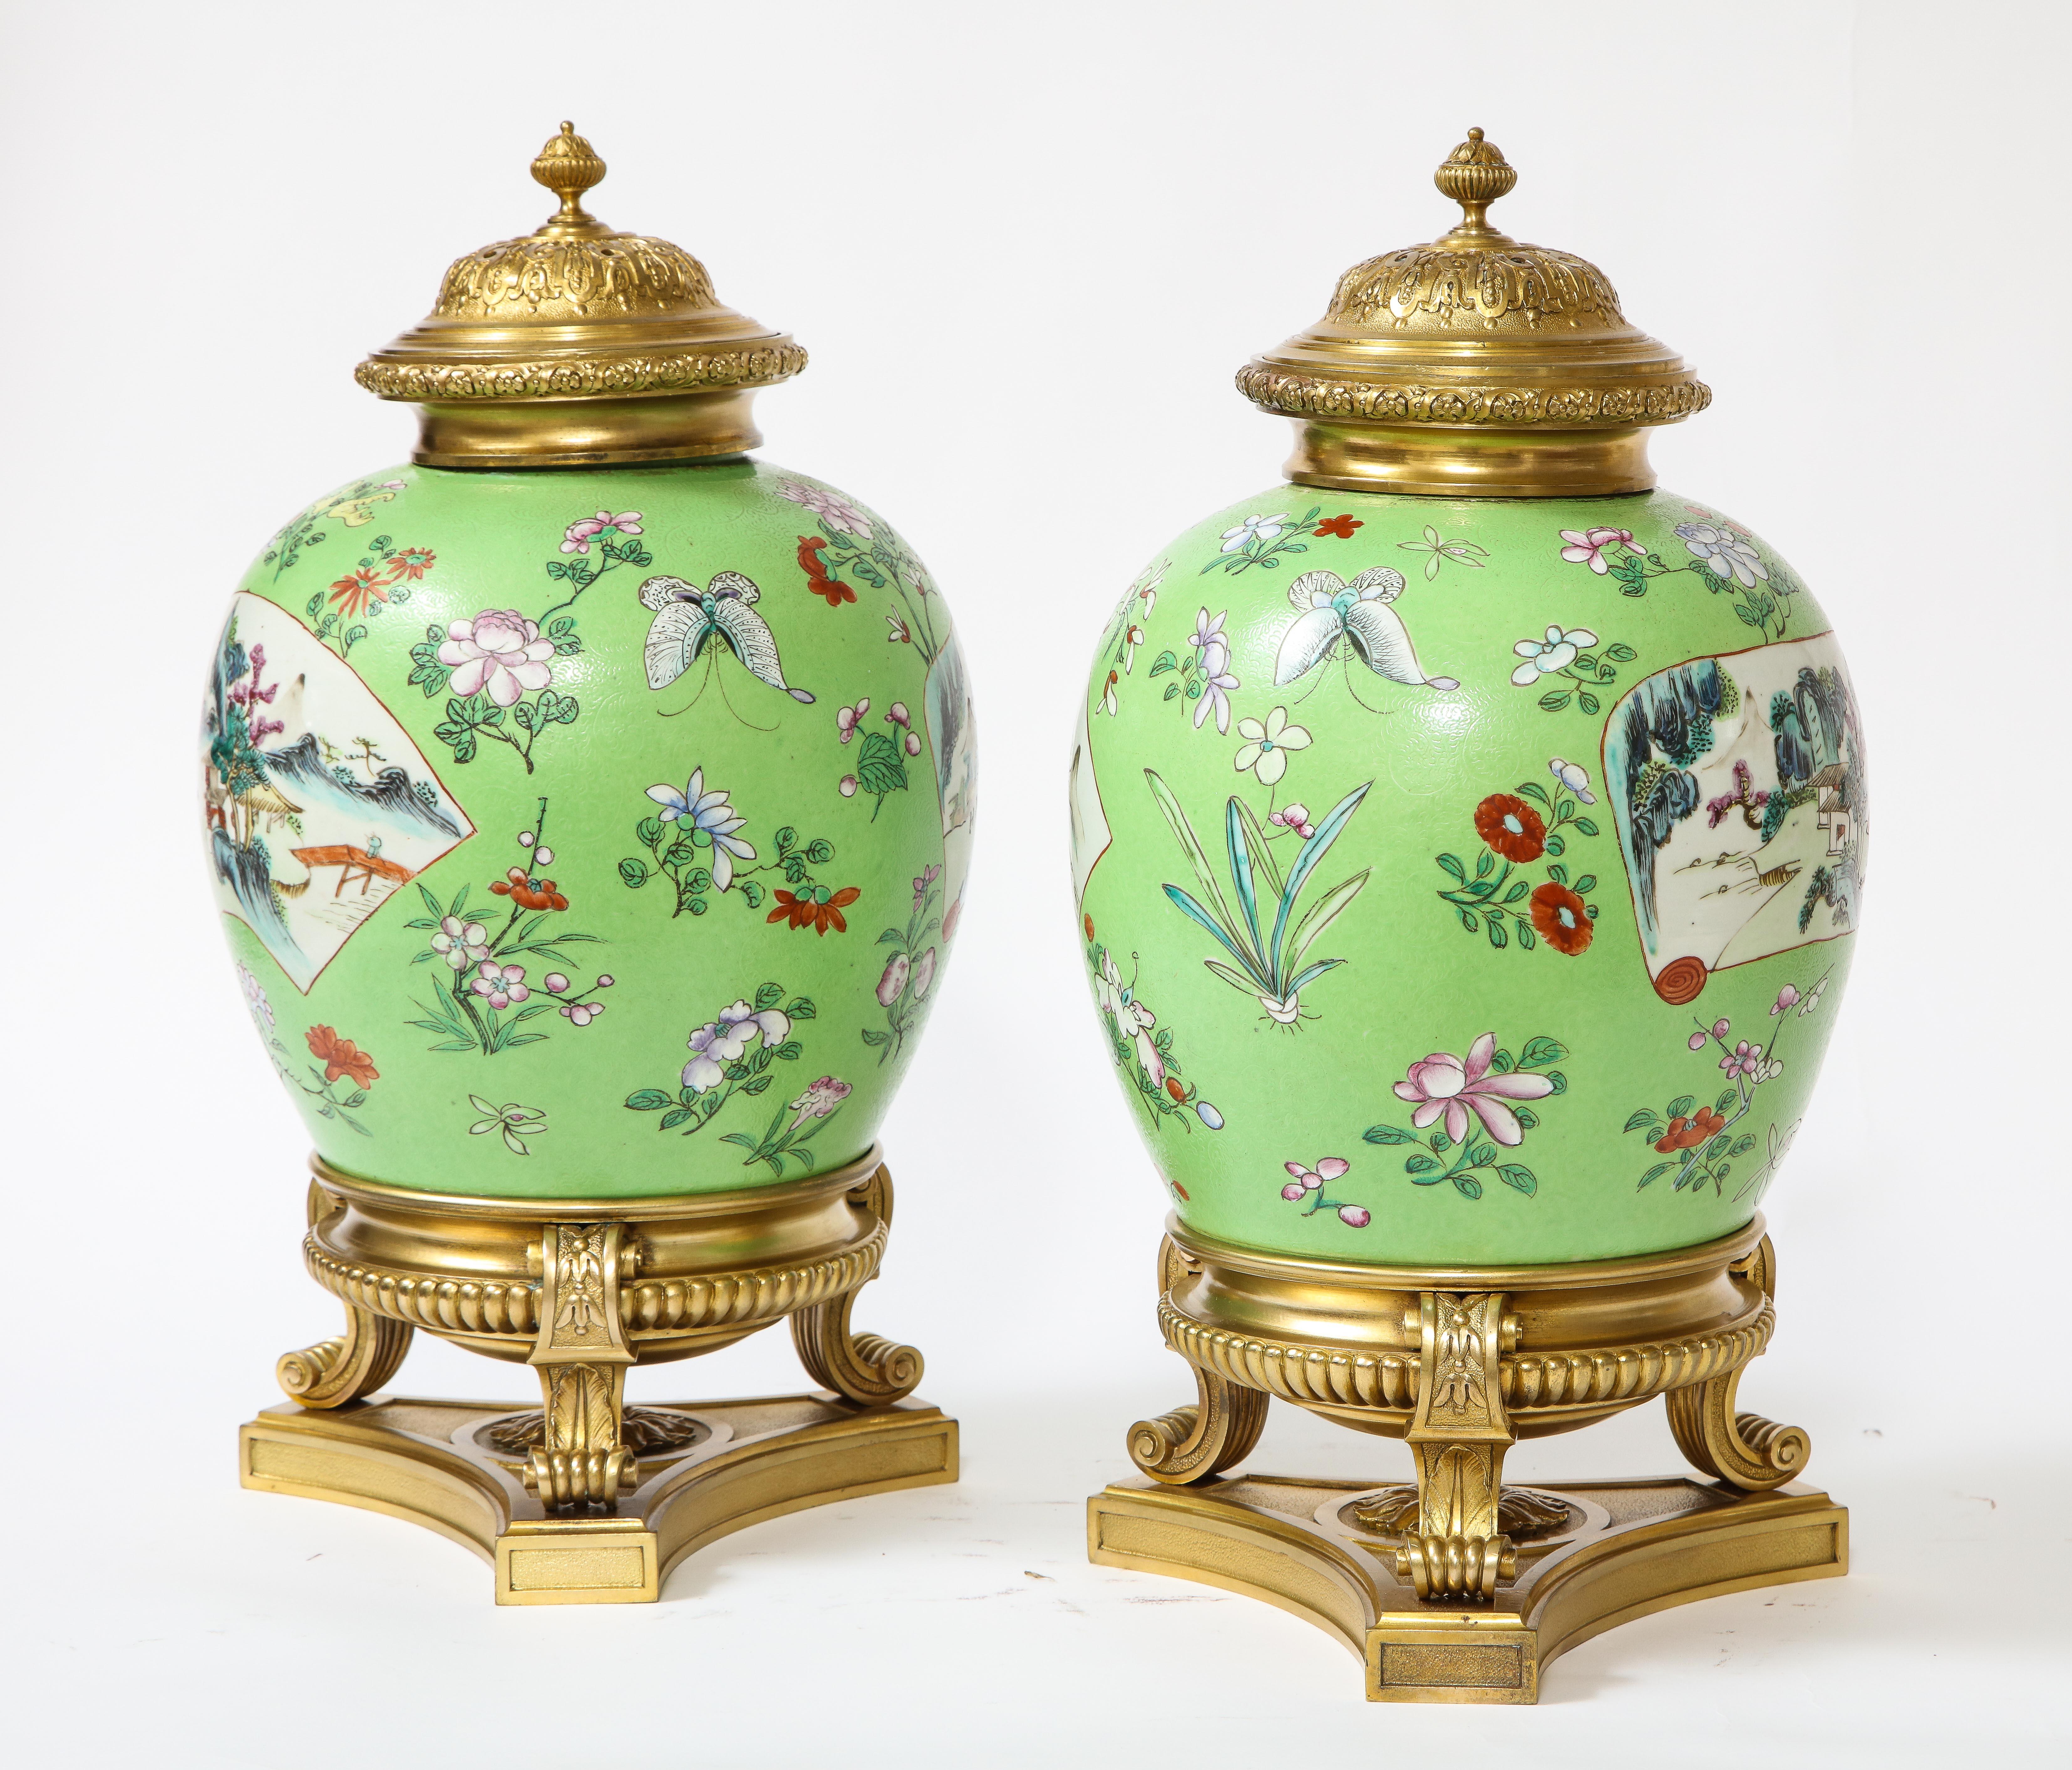 Pair of Dore Bronze Mounted Chinese Famille Rose Porcelain Vases In Good Condition For Sale In New York, NY